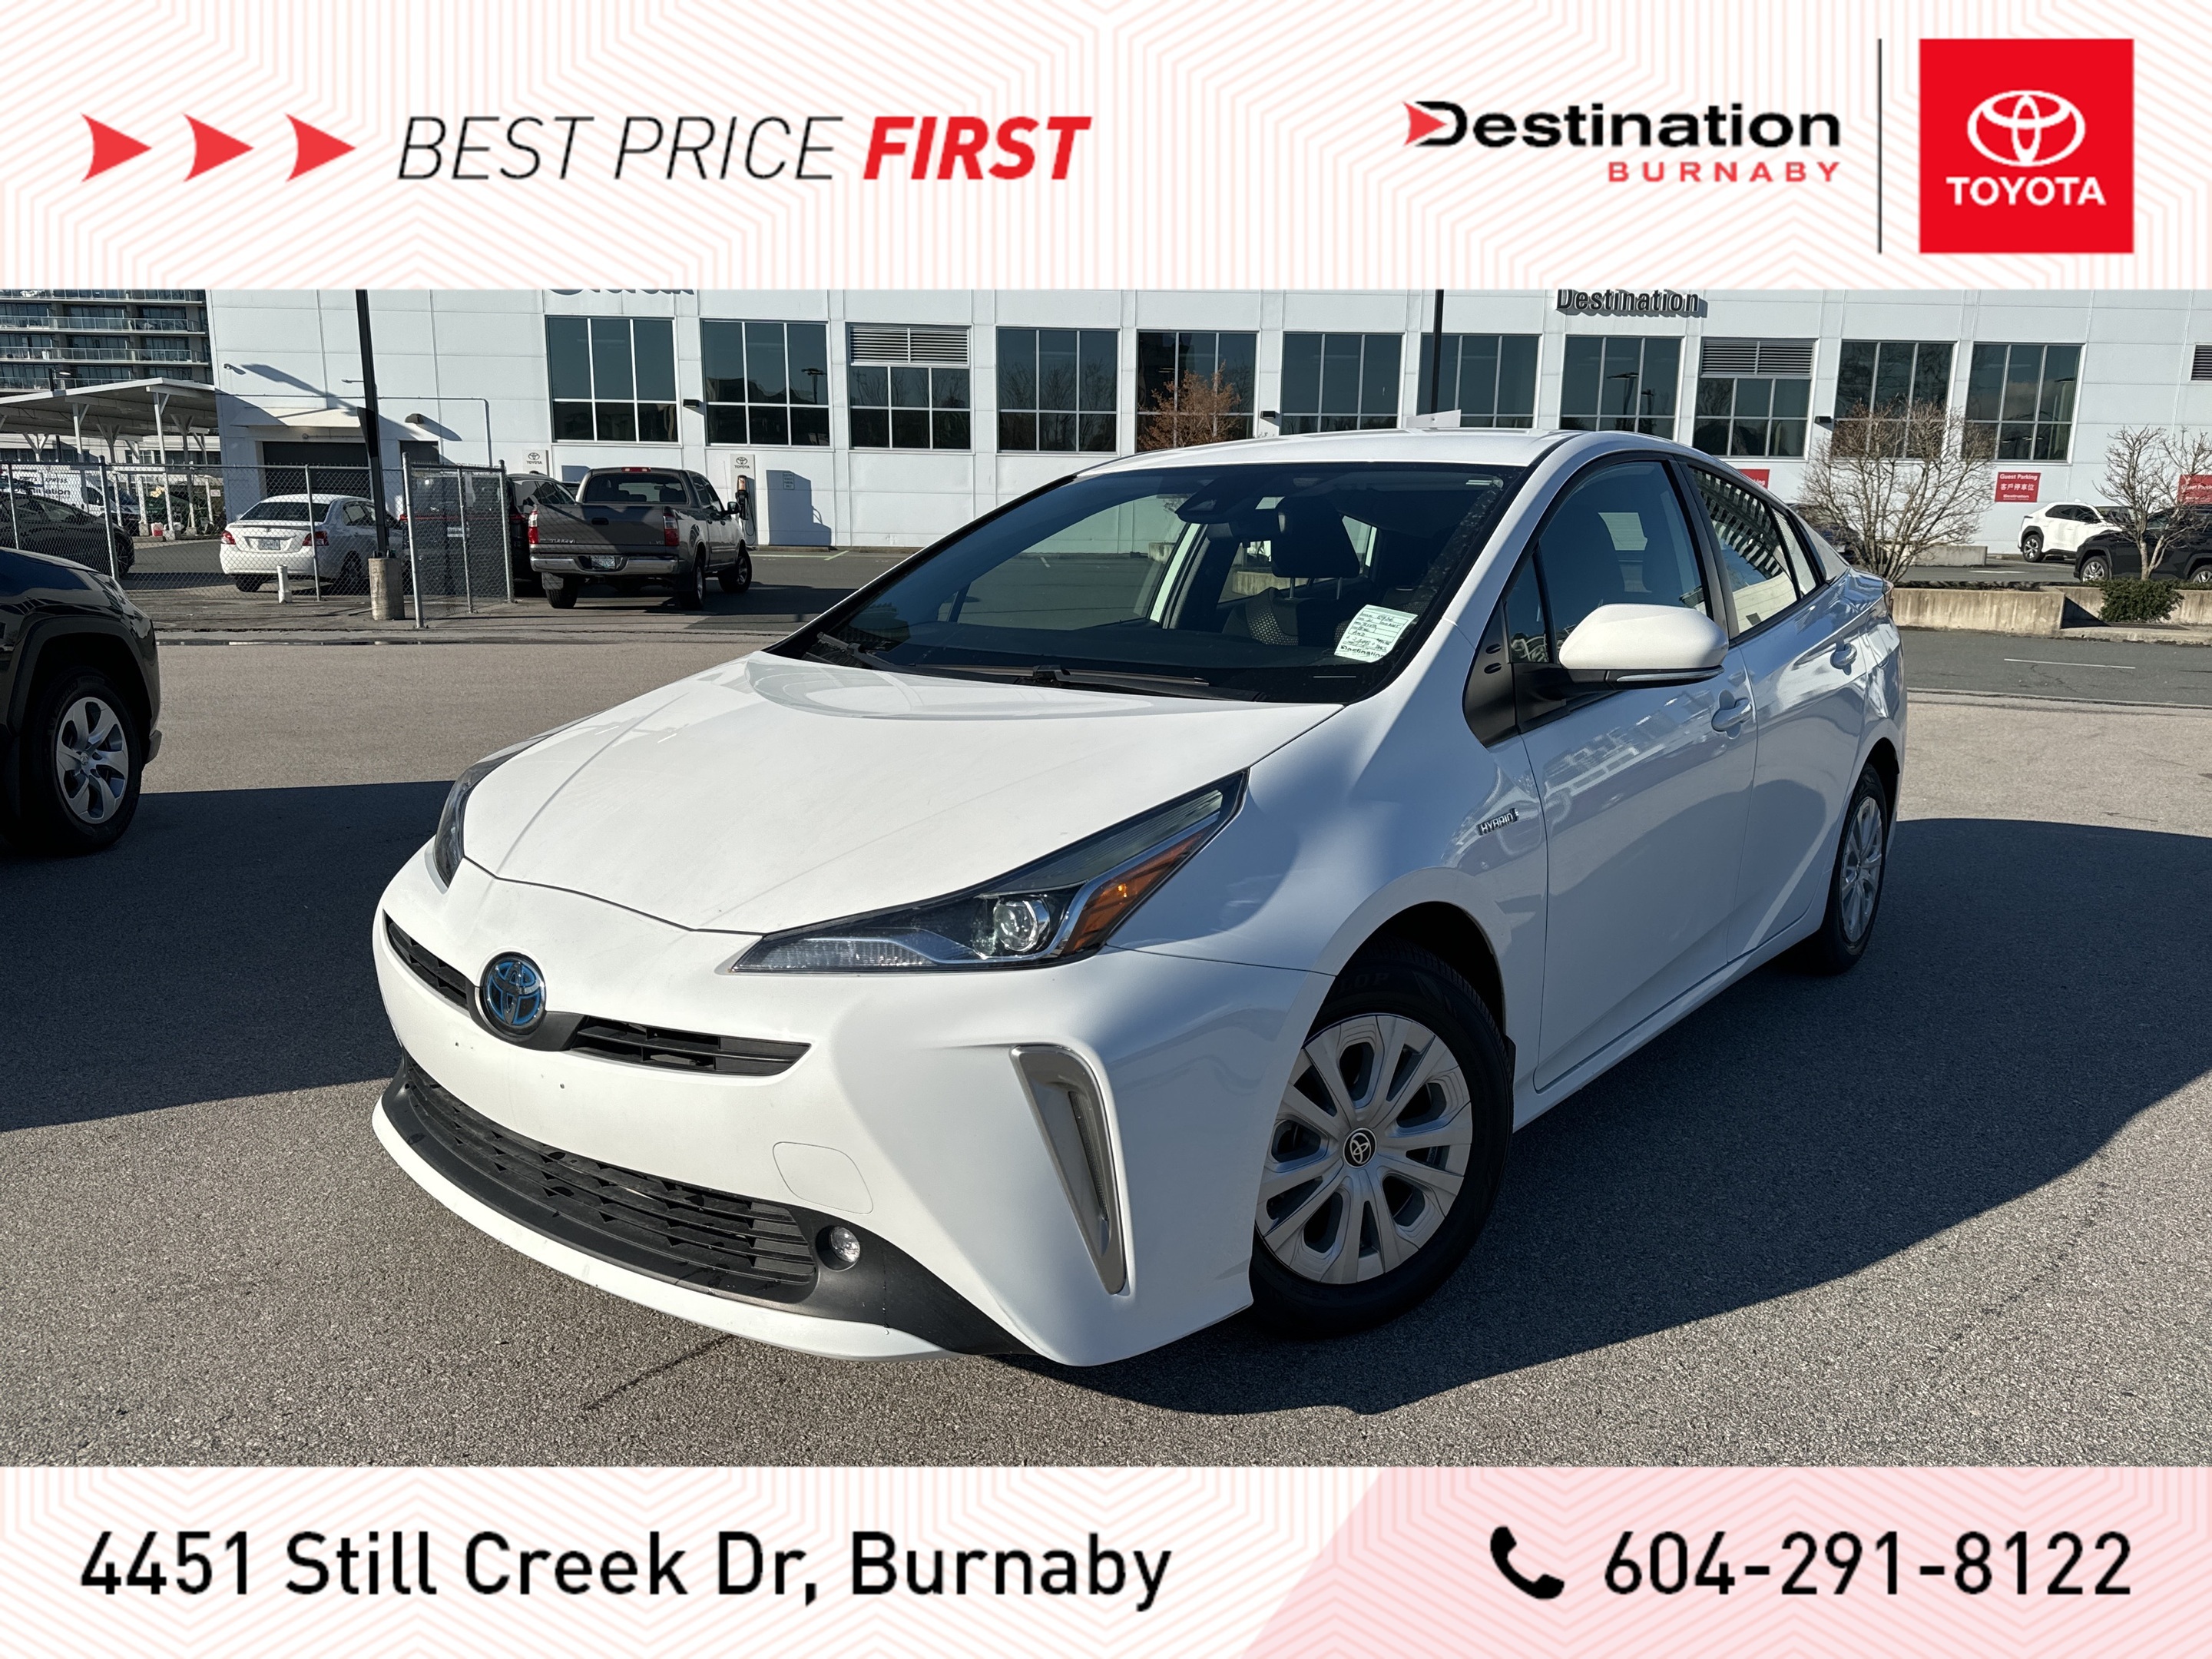 2021 Toyota Prius AWD - LOCAL BC CAR WITH ONE OWNER!